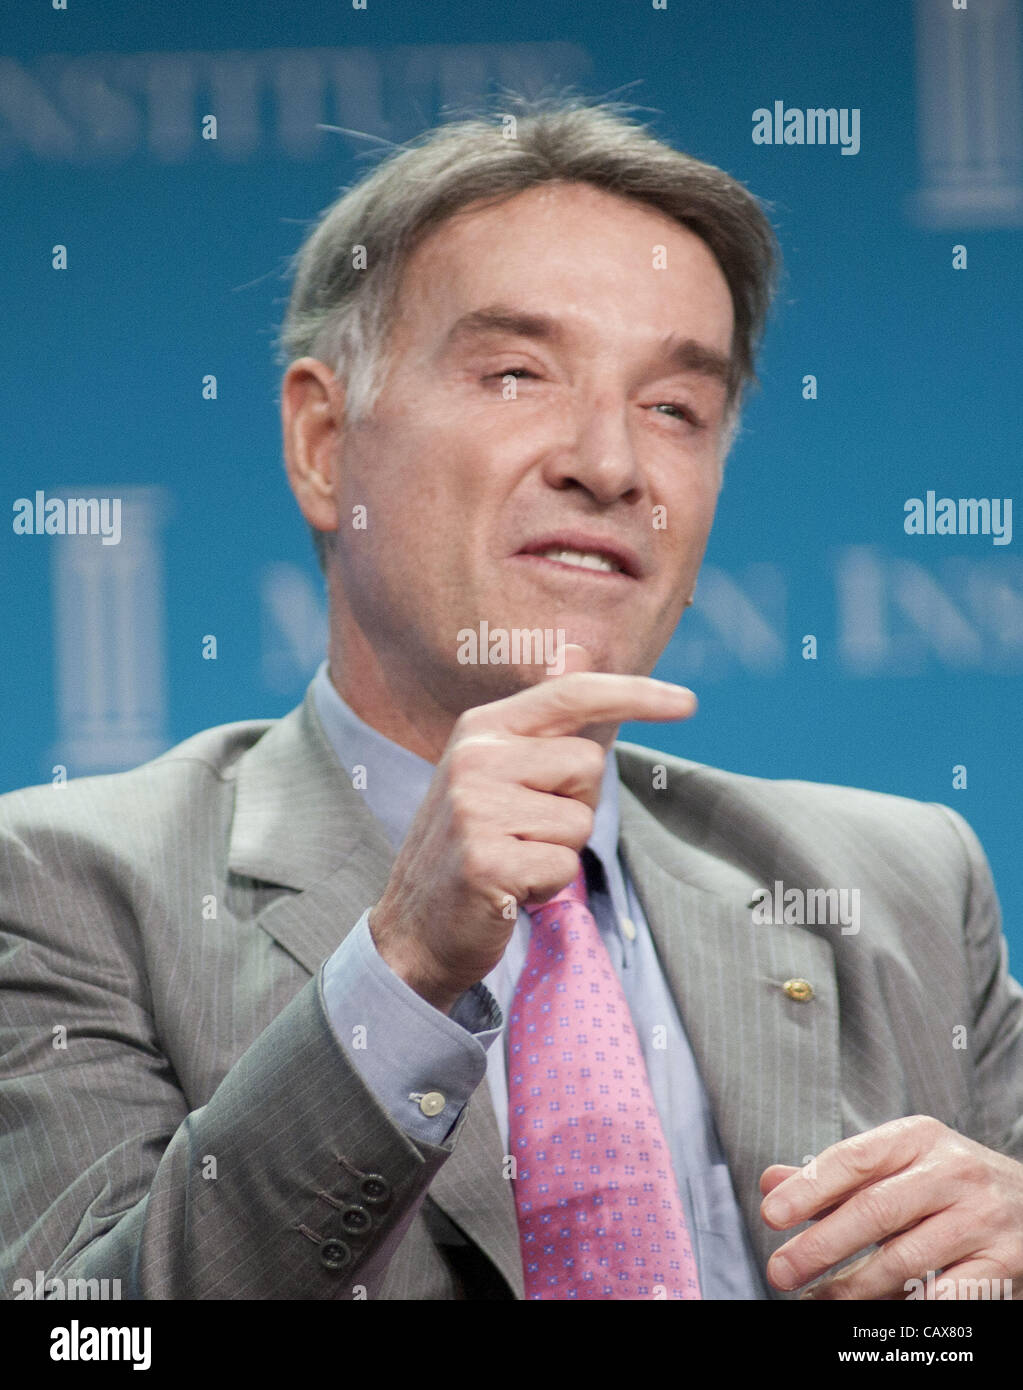 April 30, 2012 - Beverly Hills, California, USA - Eike Batista, Chairman and CEO, EBX Group at the panel discussion entitled 'Mike Milken Interviews Eike Batista and T. Boone Pickens'  during the Milken Institute Global Conference held Monday, April 30 2012 at the Hilton Hotel in Beverly Hills, Cali Stock Photo